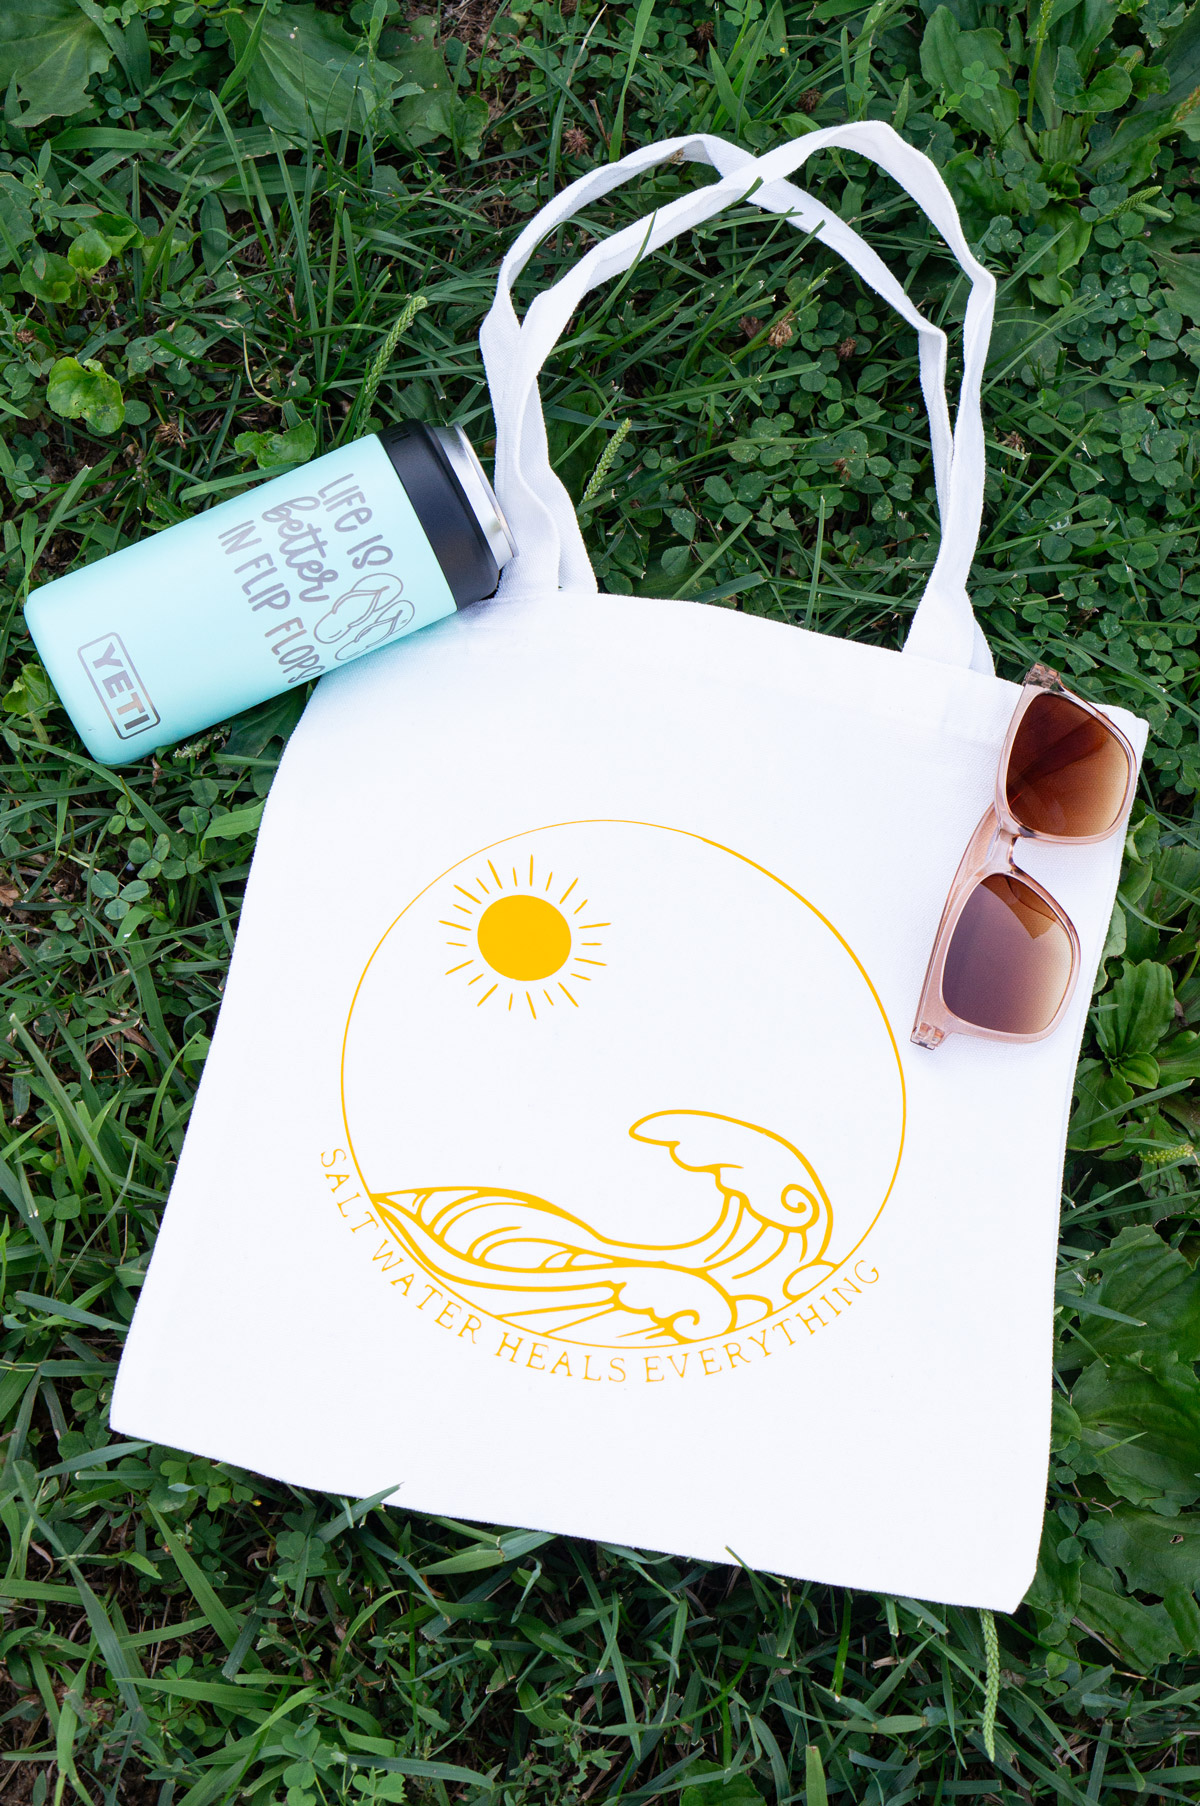 In this image, it shows two of the SVGs from the free summer SVG set. The first one says salt water heals everything with the picture of waves and the sun on a tote bag. The second one says life is better in flip flops with an image of some flip flops, engraved on a Yeti tumbler colster.